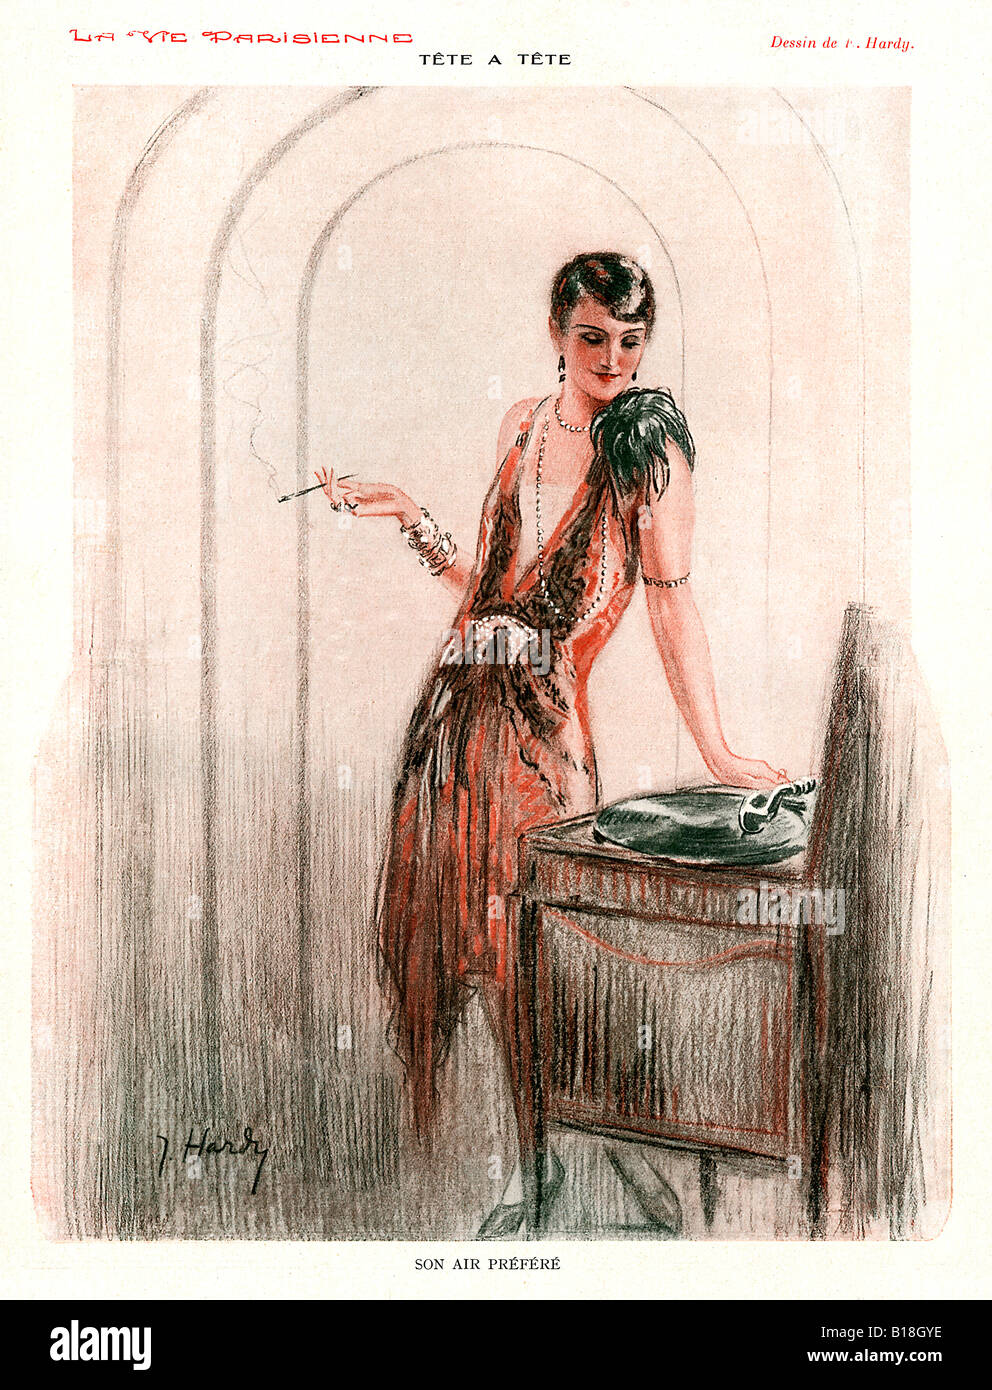 Tete a Tete, Son Air Prefere 1922 classic French 1920s illustration from the magazine La Vie Parisienne a lady listens to a record on the gramophone Stock Photo